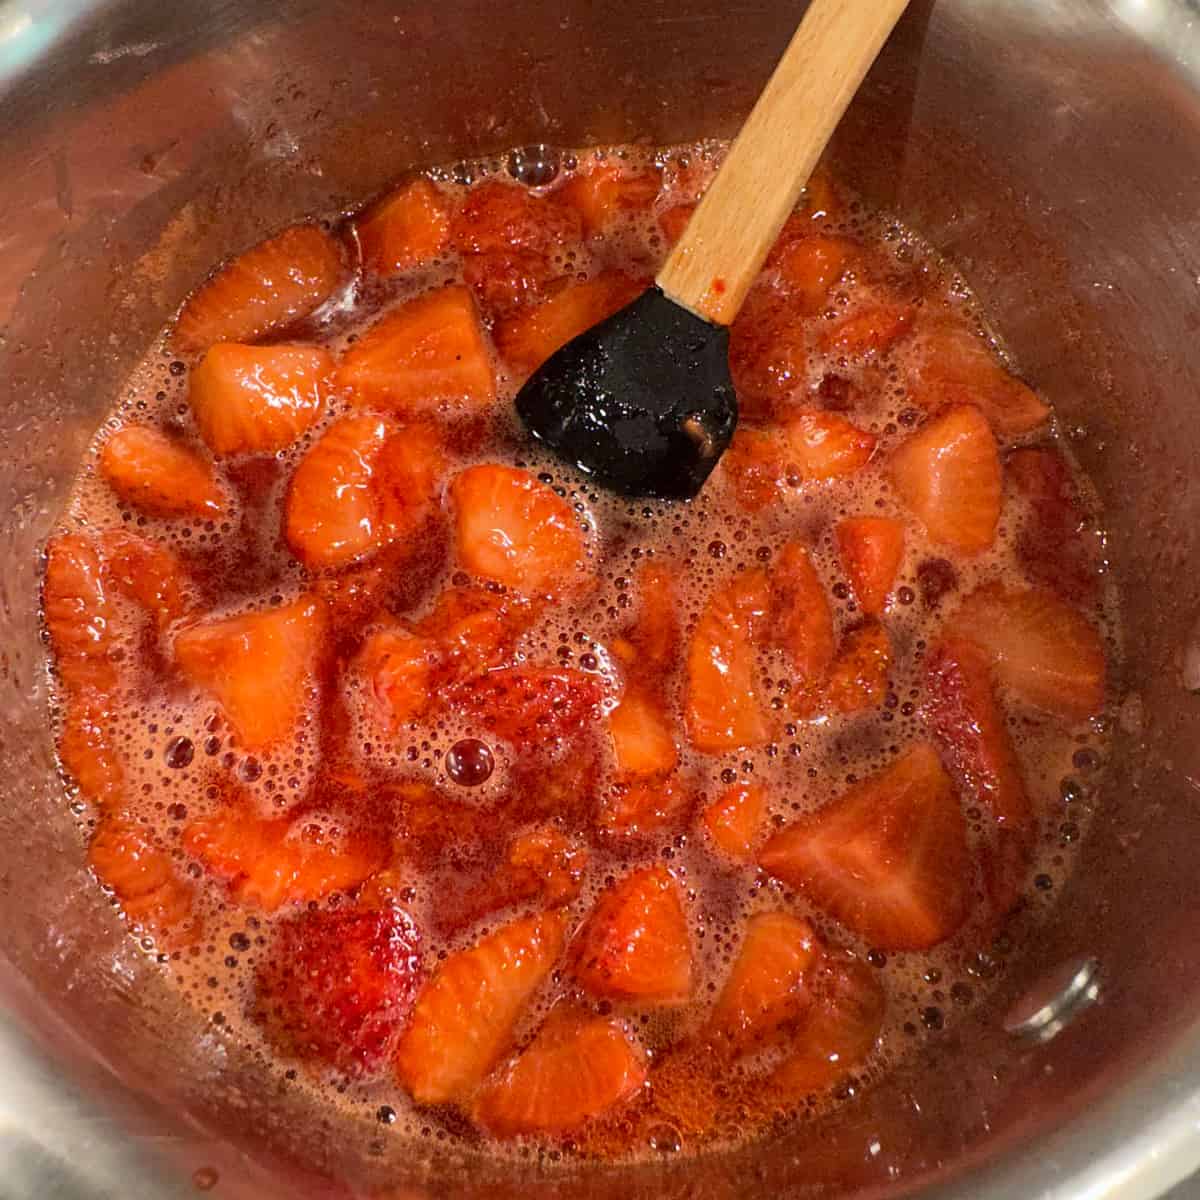 Finished product of berry compote